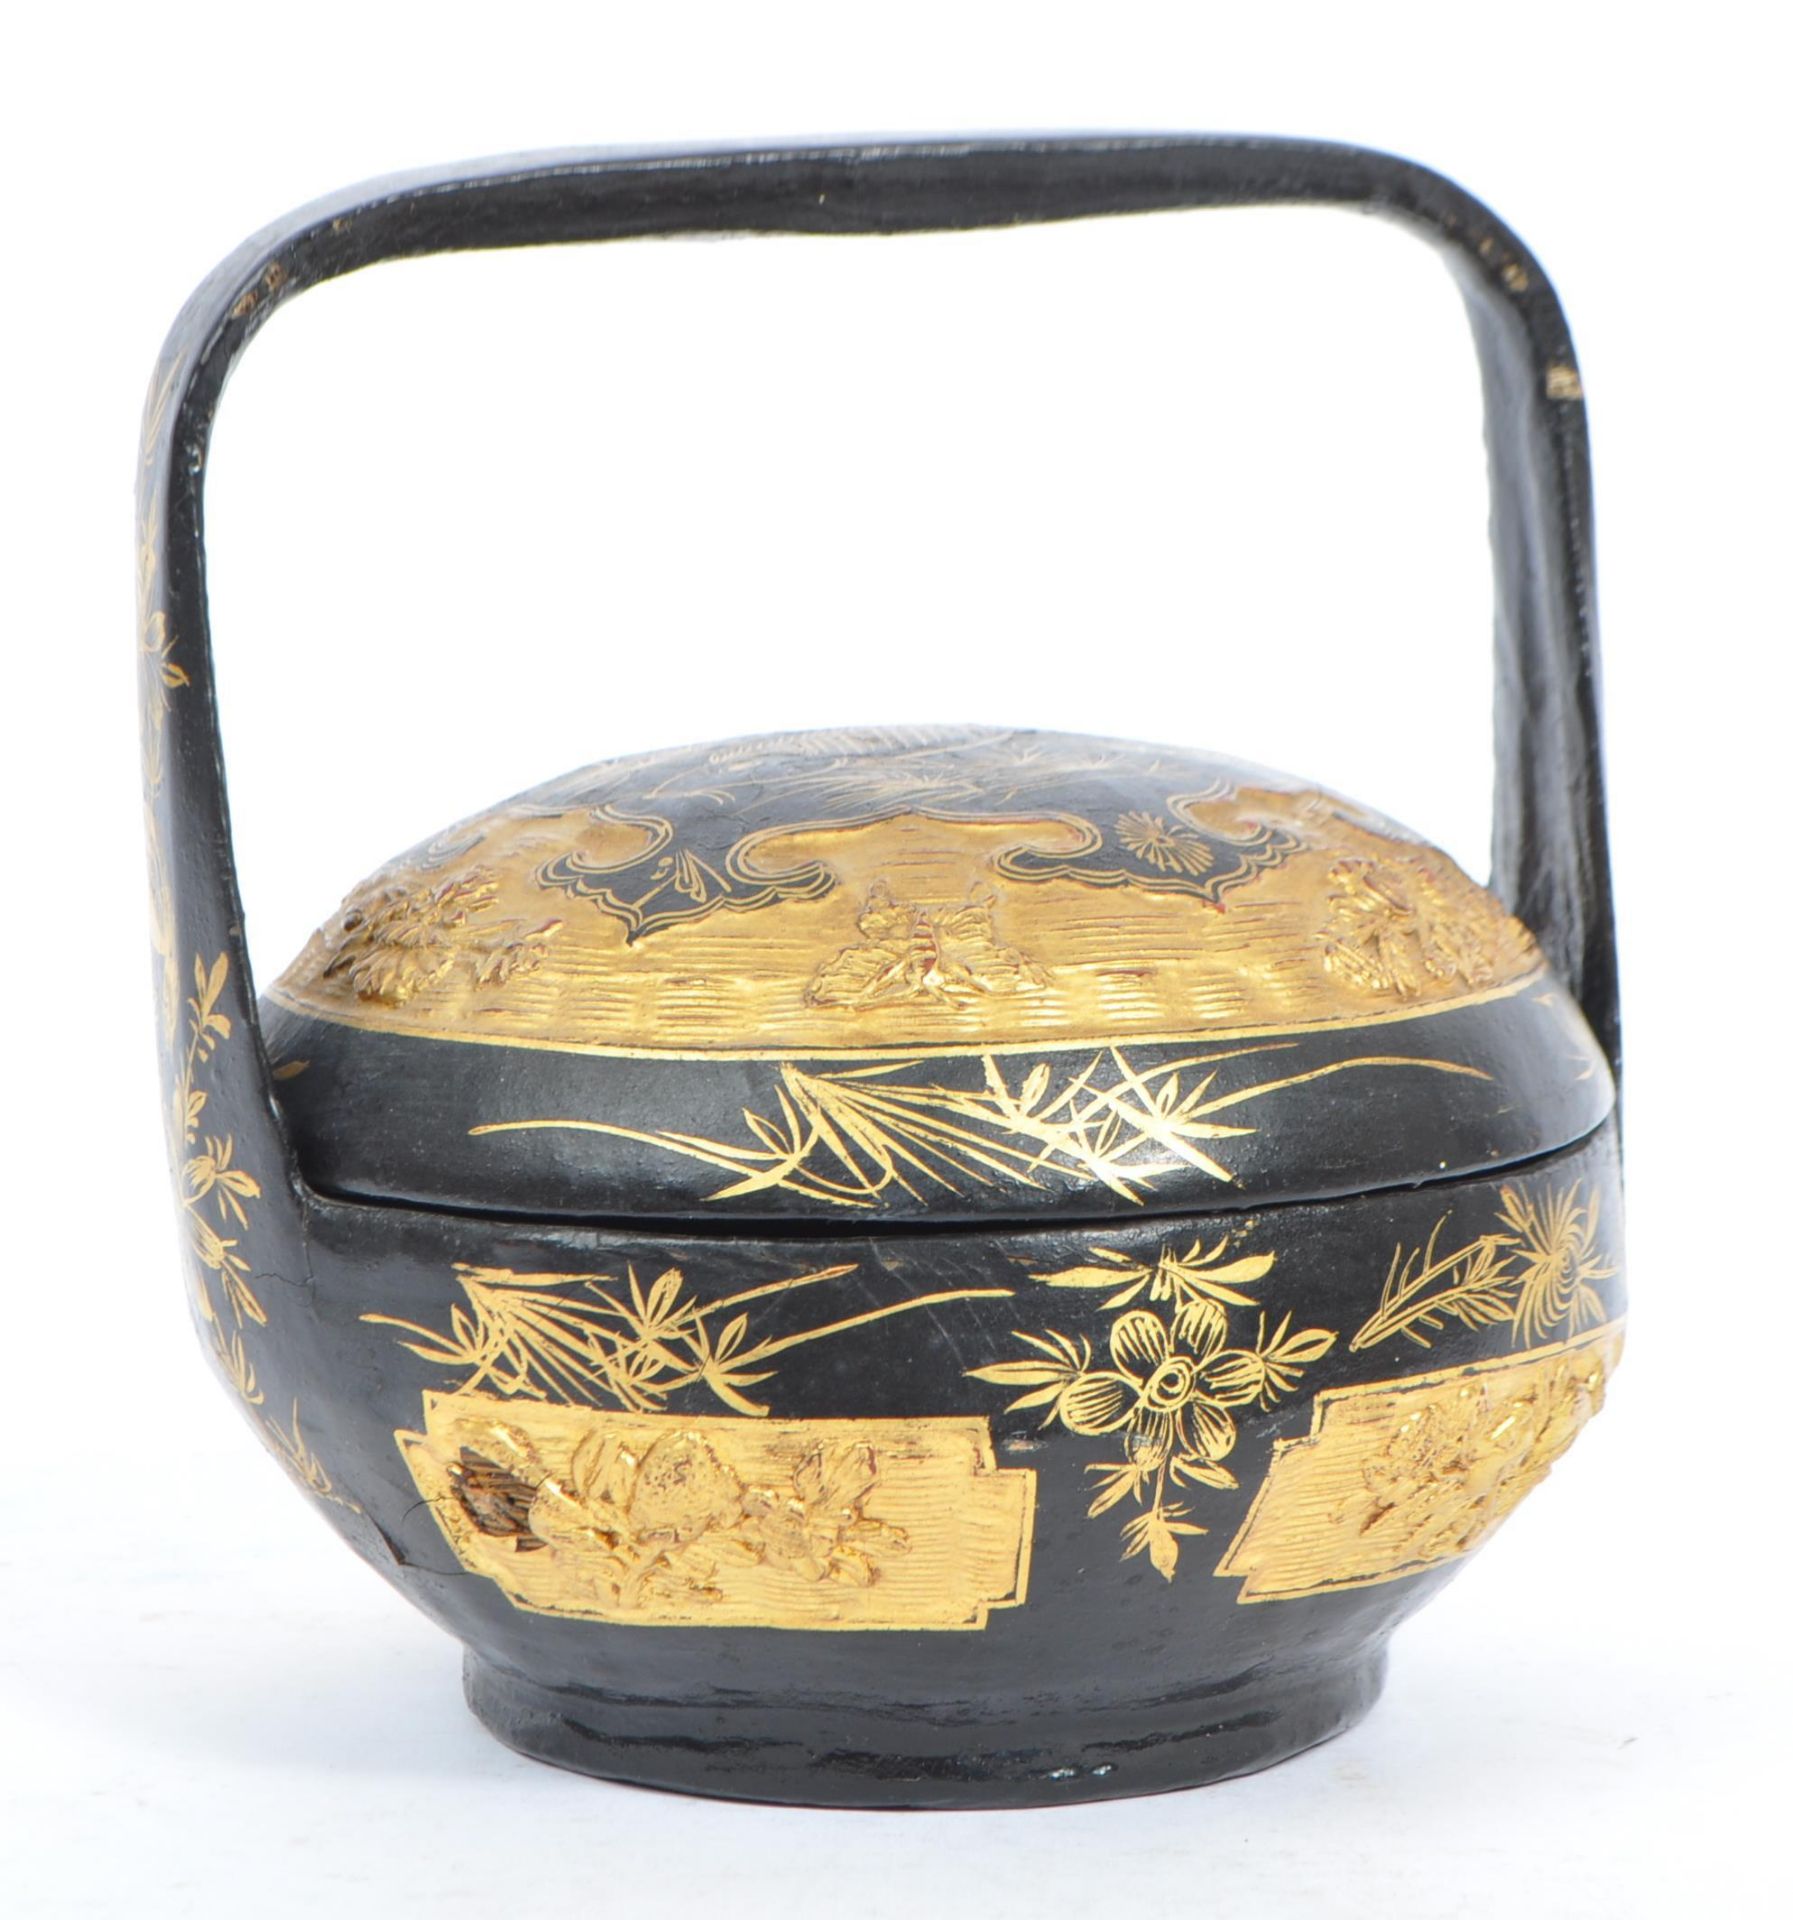 EARLY 20TH CENTURY 1920S CHINESE LAQUERED WEDDING BASKET